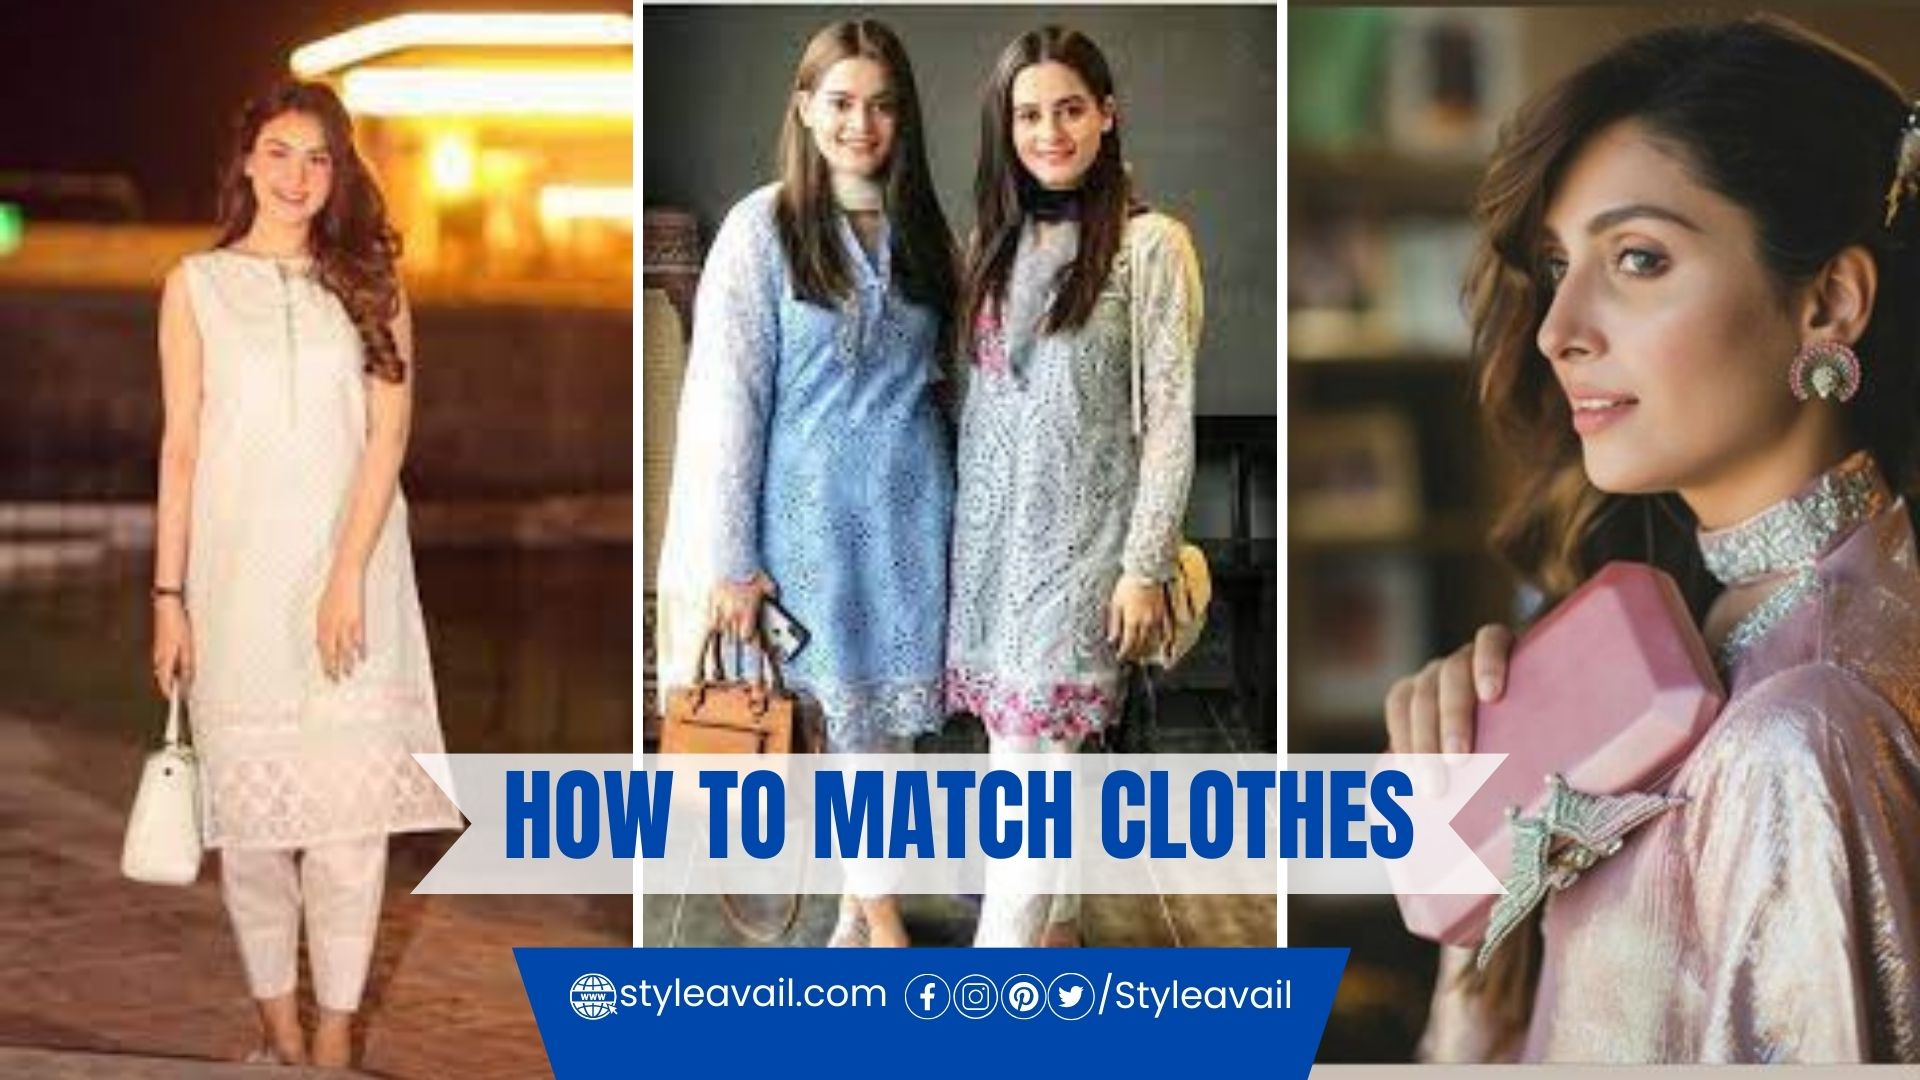 How to Match Clothes